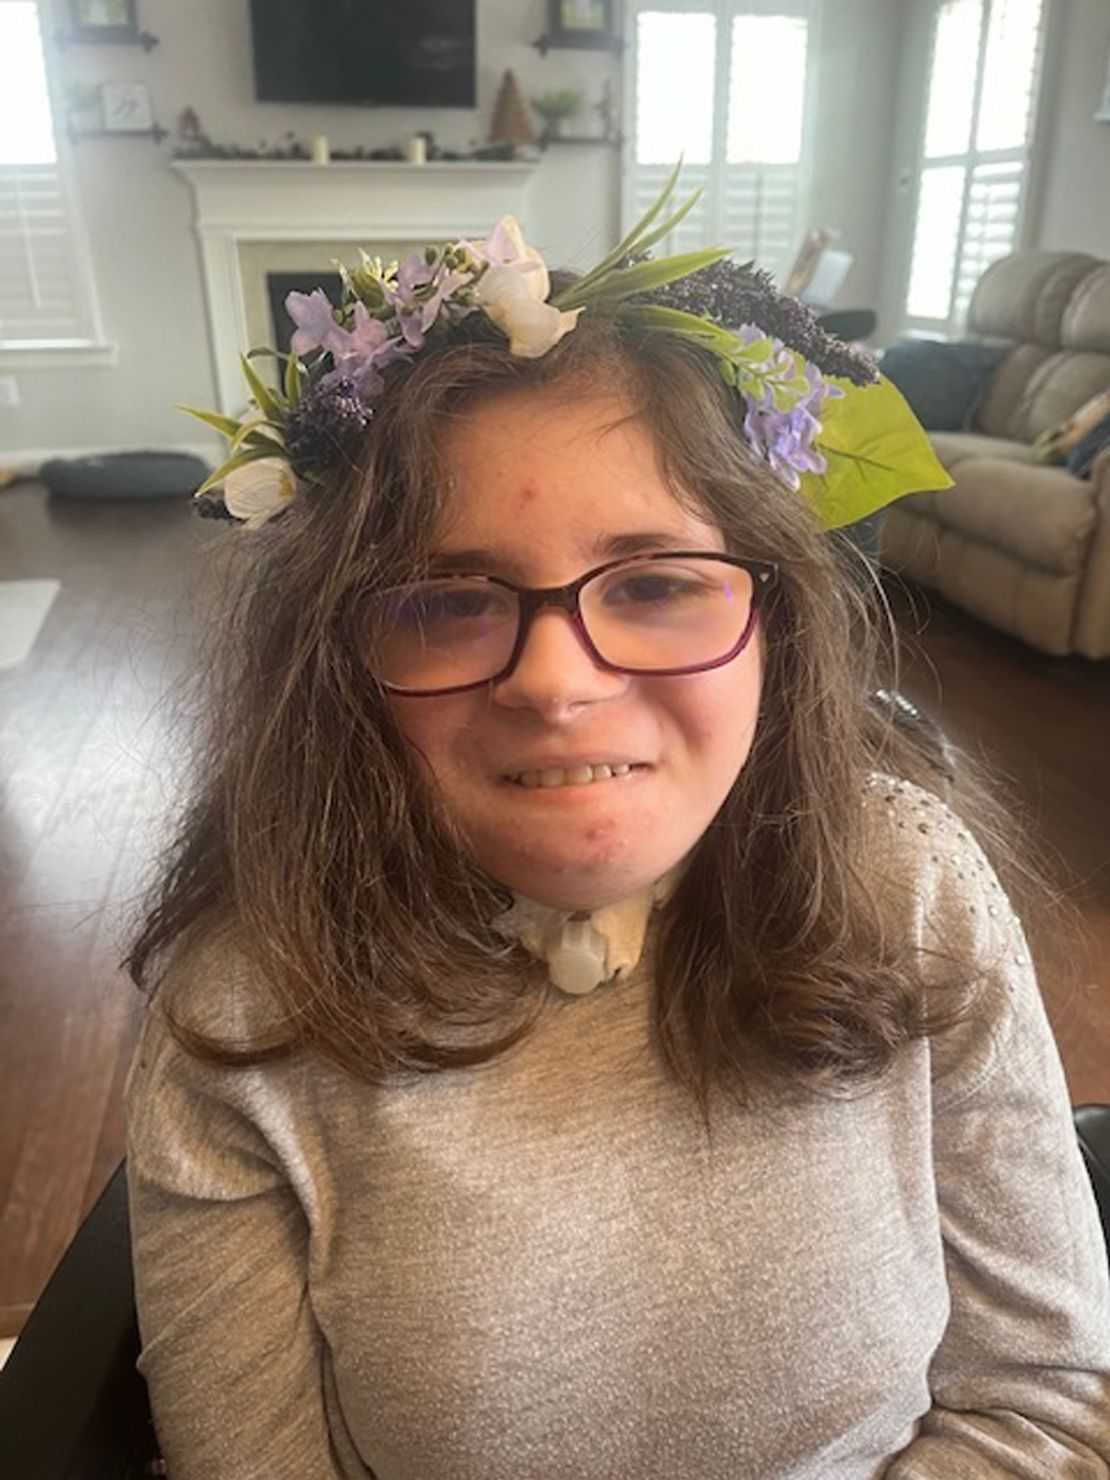 13-year-old Abby needs a daily asthma medication to help her breathe, but her options have become pricier and harder to find this year.